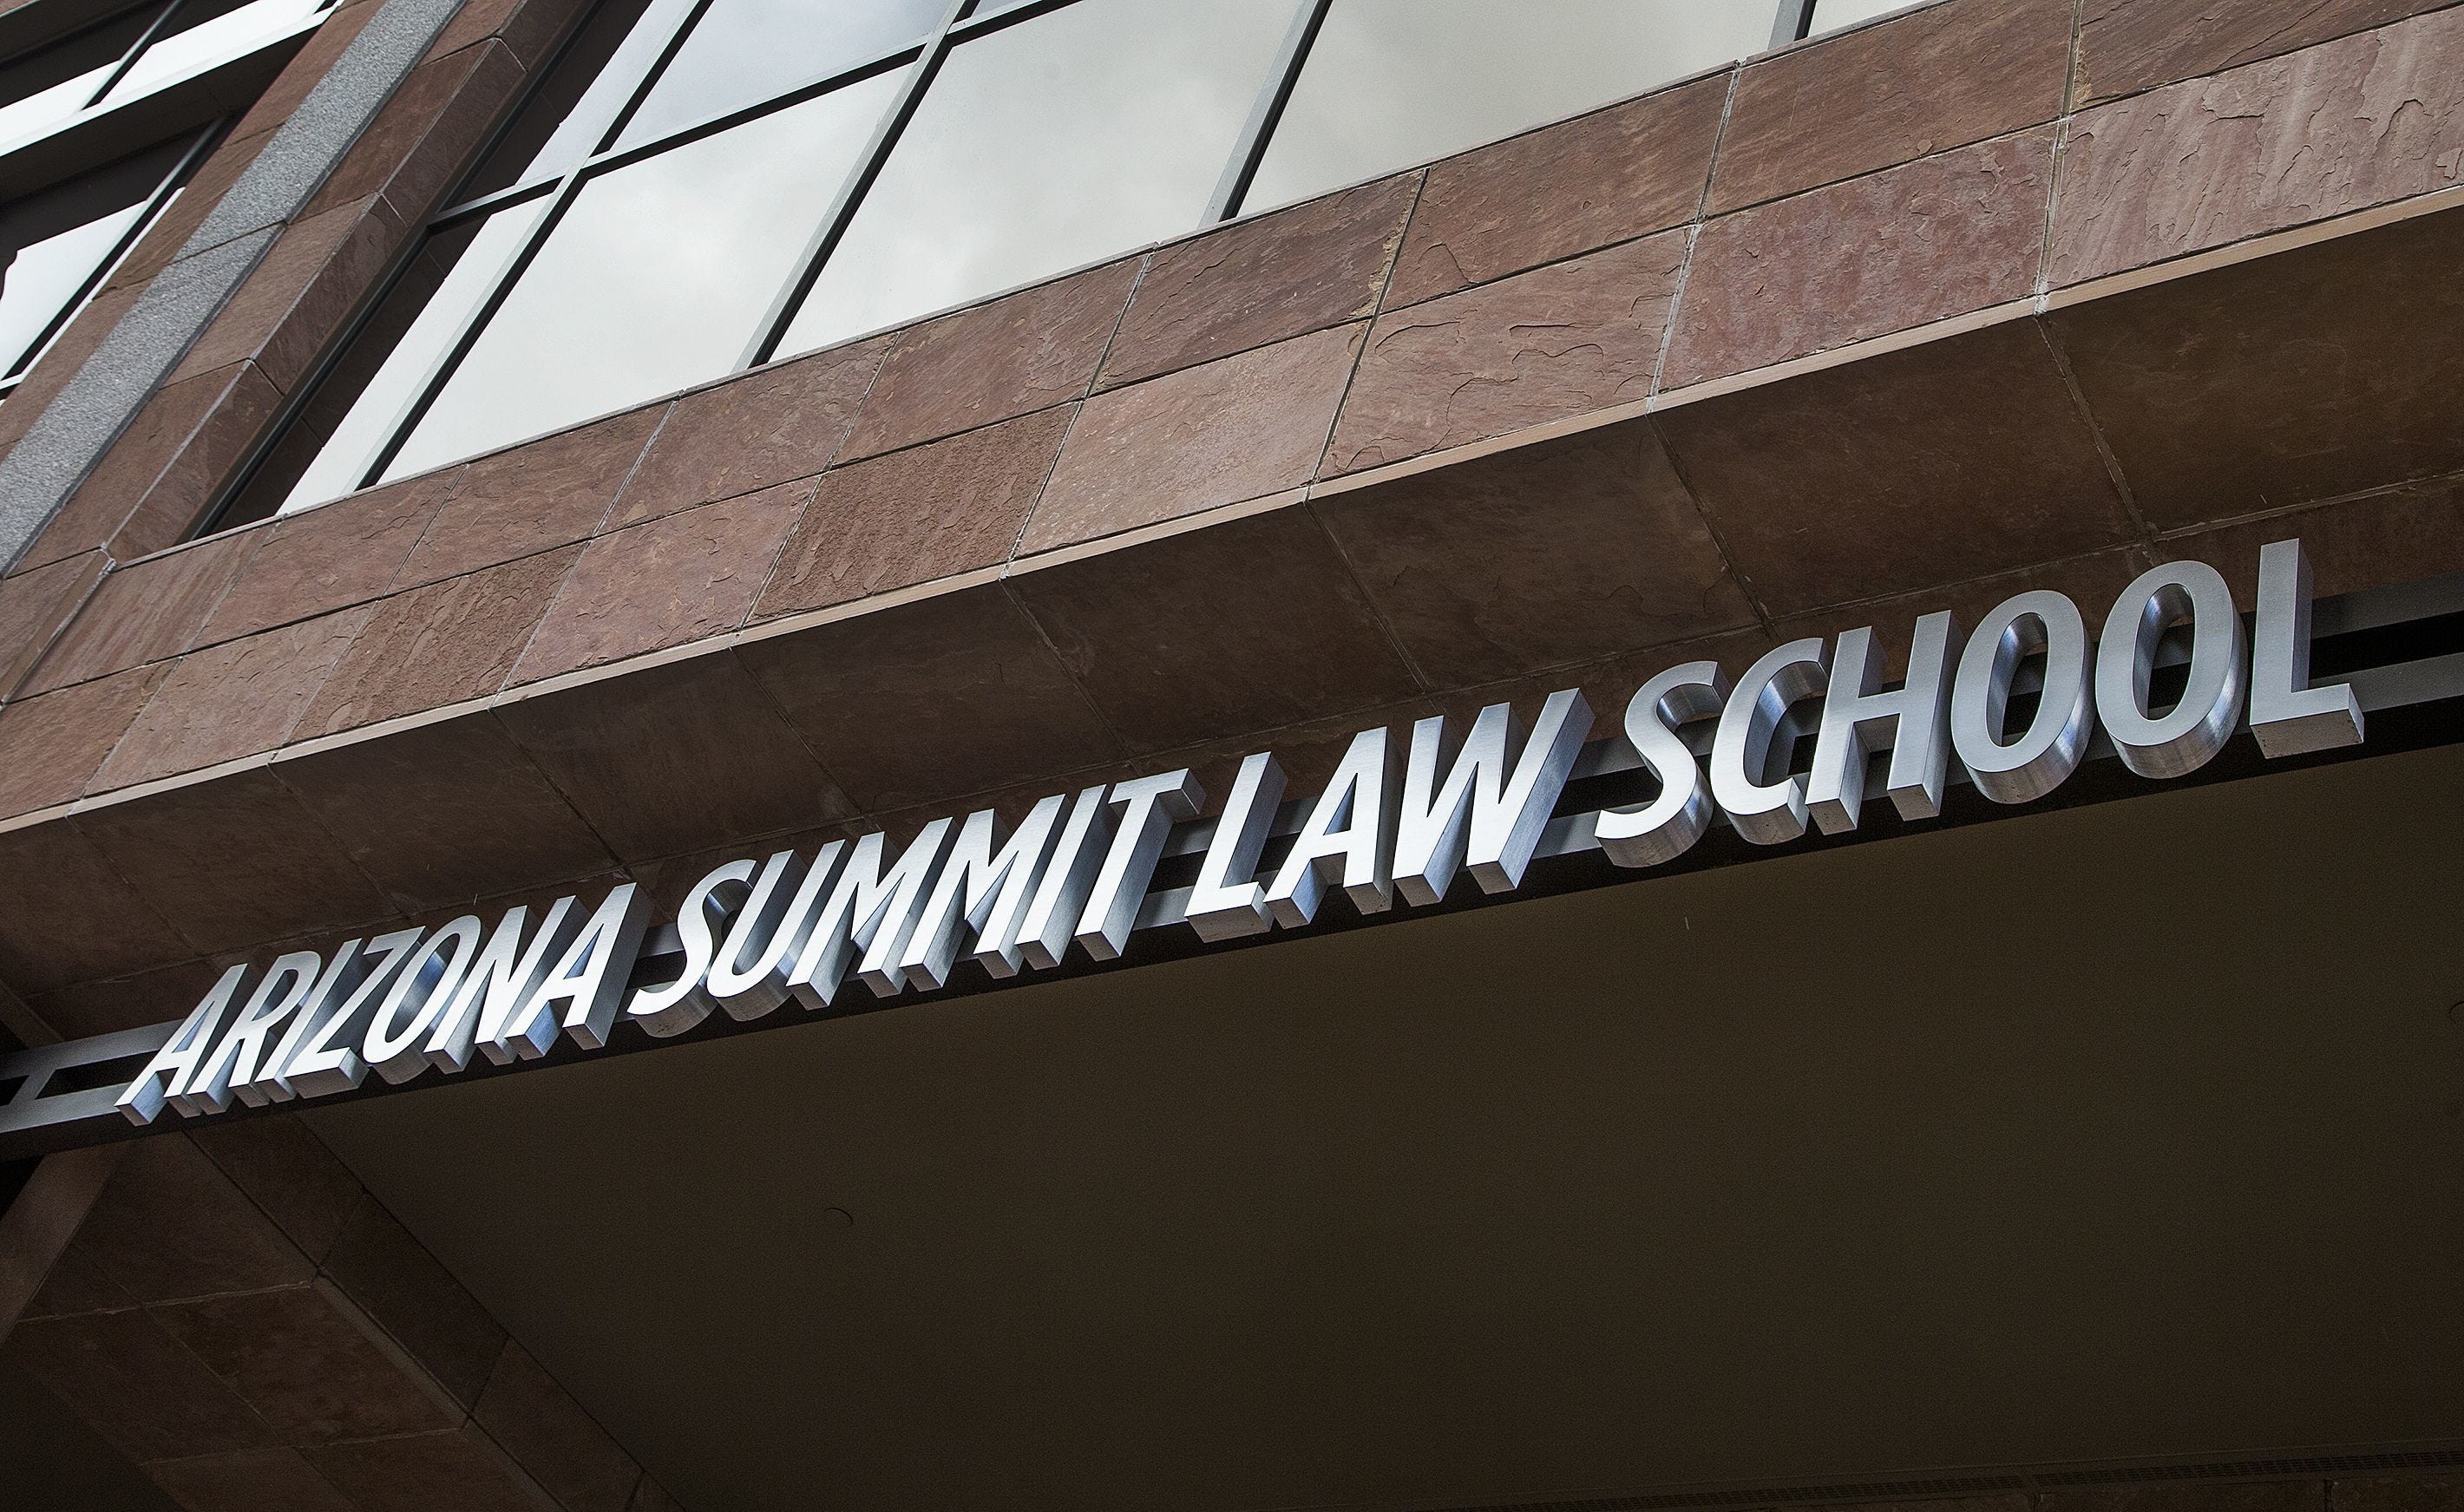 Arizona Summit Law School won&apos;t offer classes this fall; students told to transfer